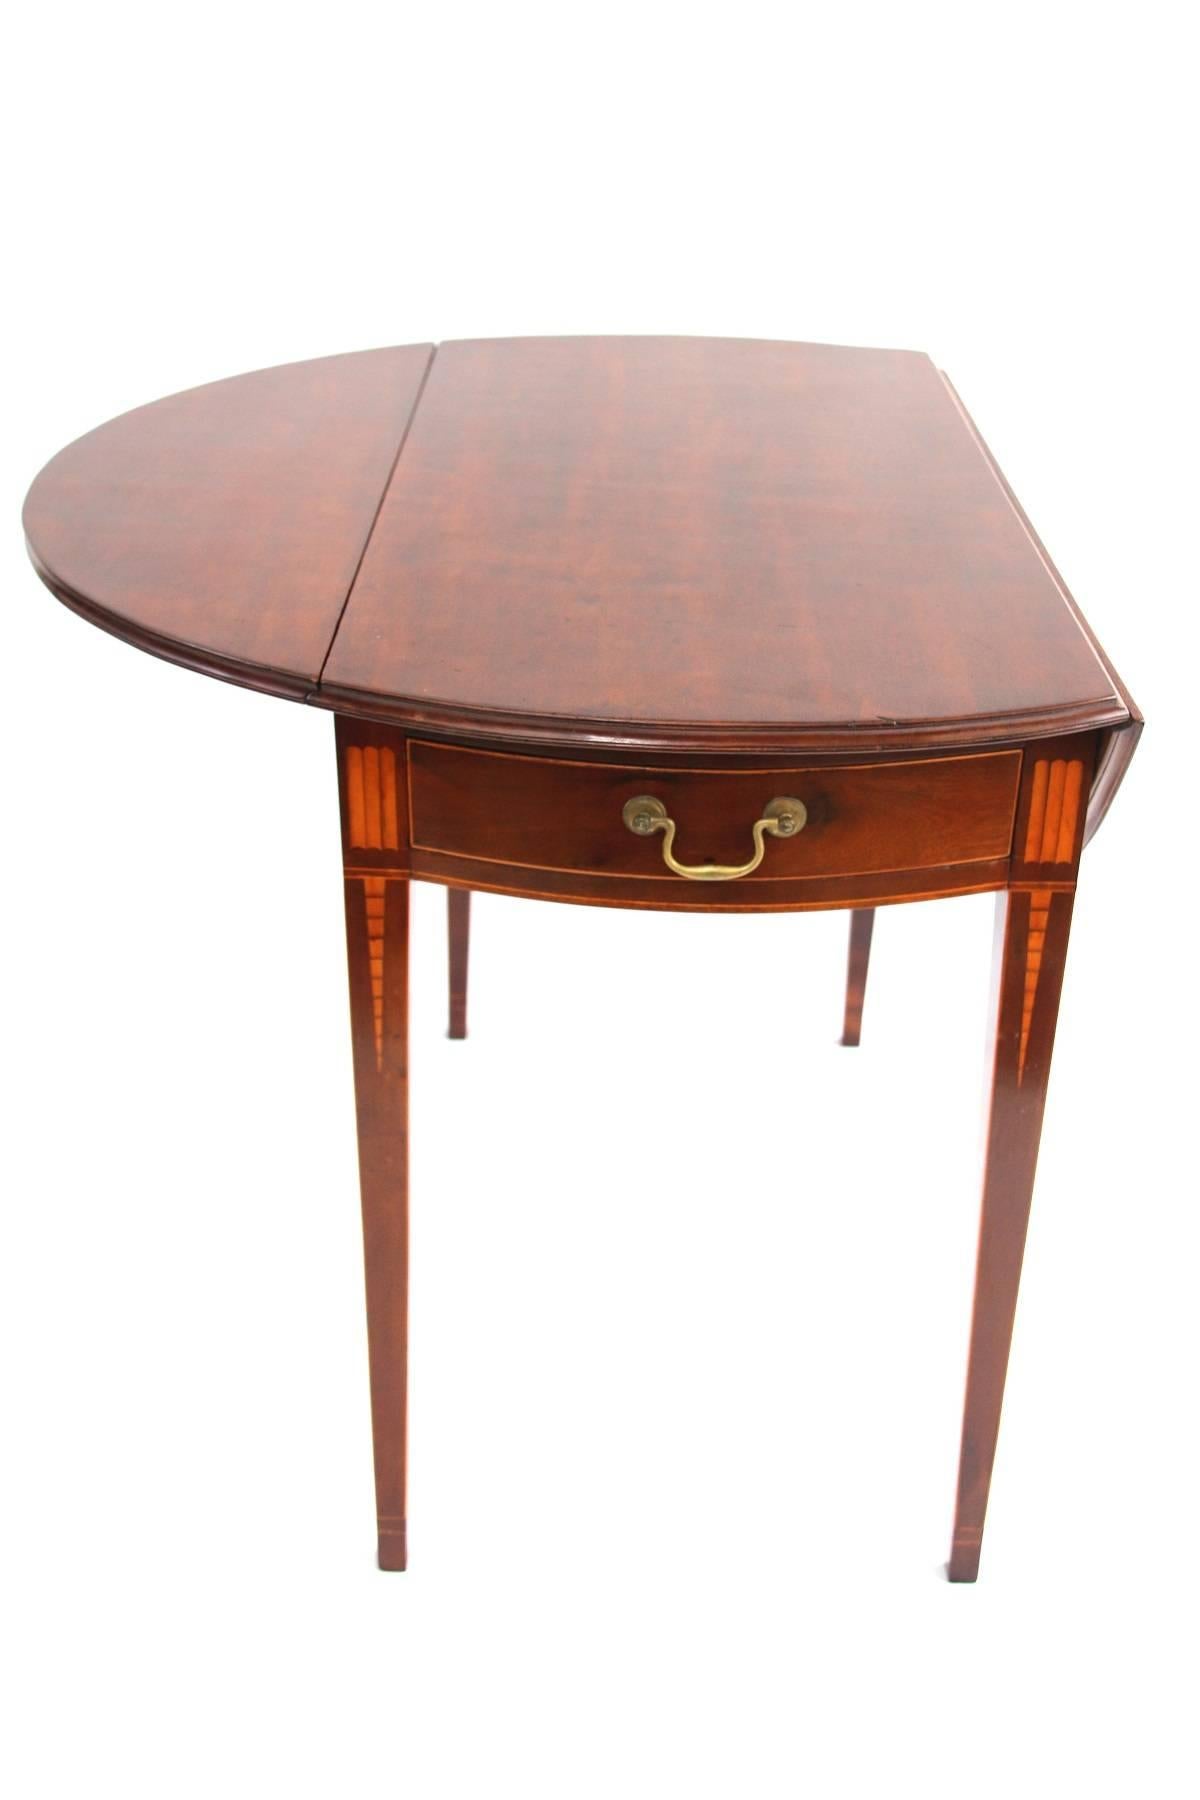 Mahogany and mahogany veneer inlaid pembroke table, the oval drop-leaf top above a bowed skirt with drawer flanked by book-end panels on the icicle-inlaid square tapering legs. 

Old brasses, refinished.

Connecticut, circa 1800.

Measures: